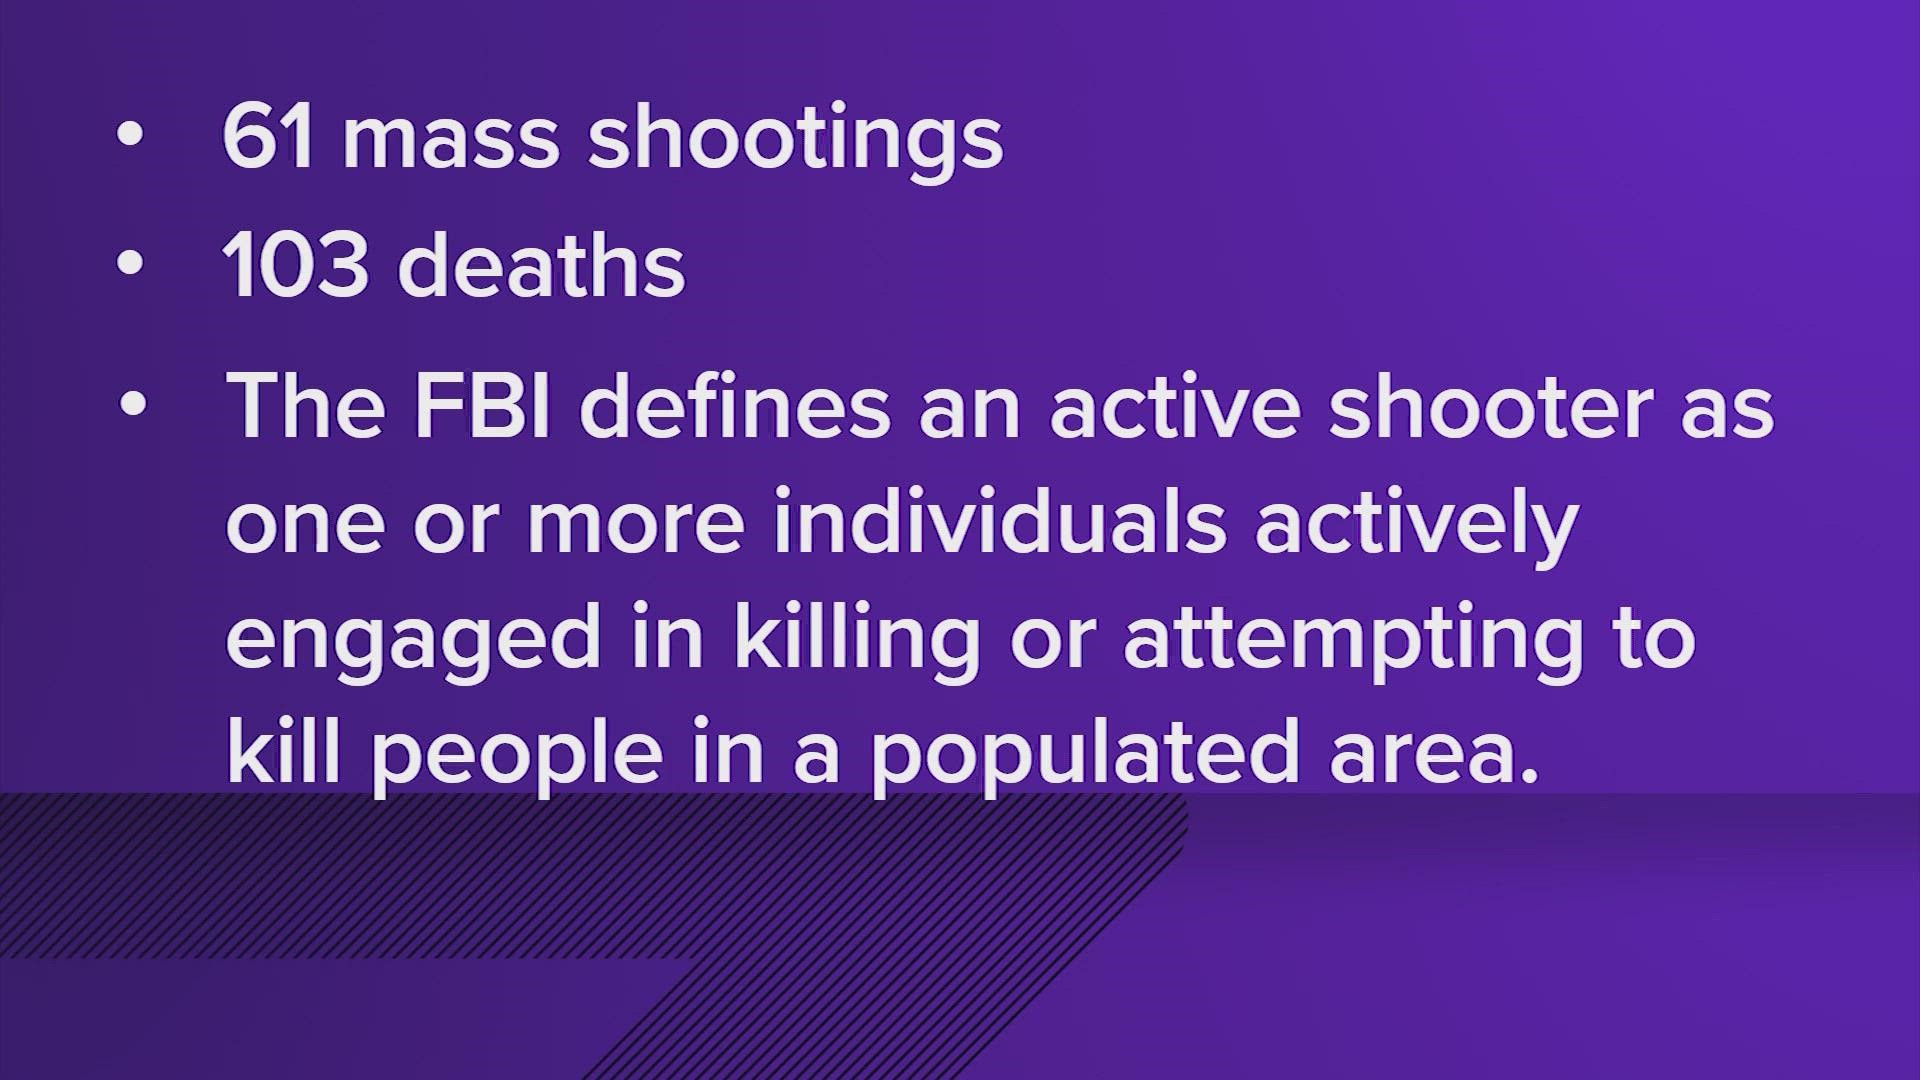 The FBI defines an active shooter as one or more individuals actively engaged in killing or attempting to kill people in a populated area.